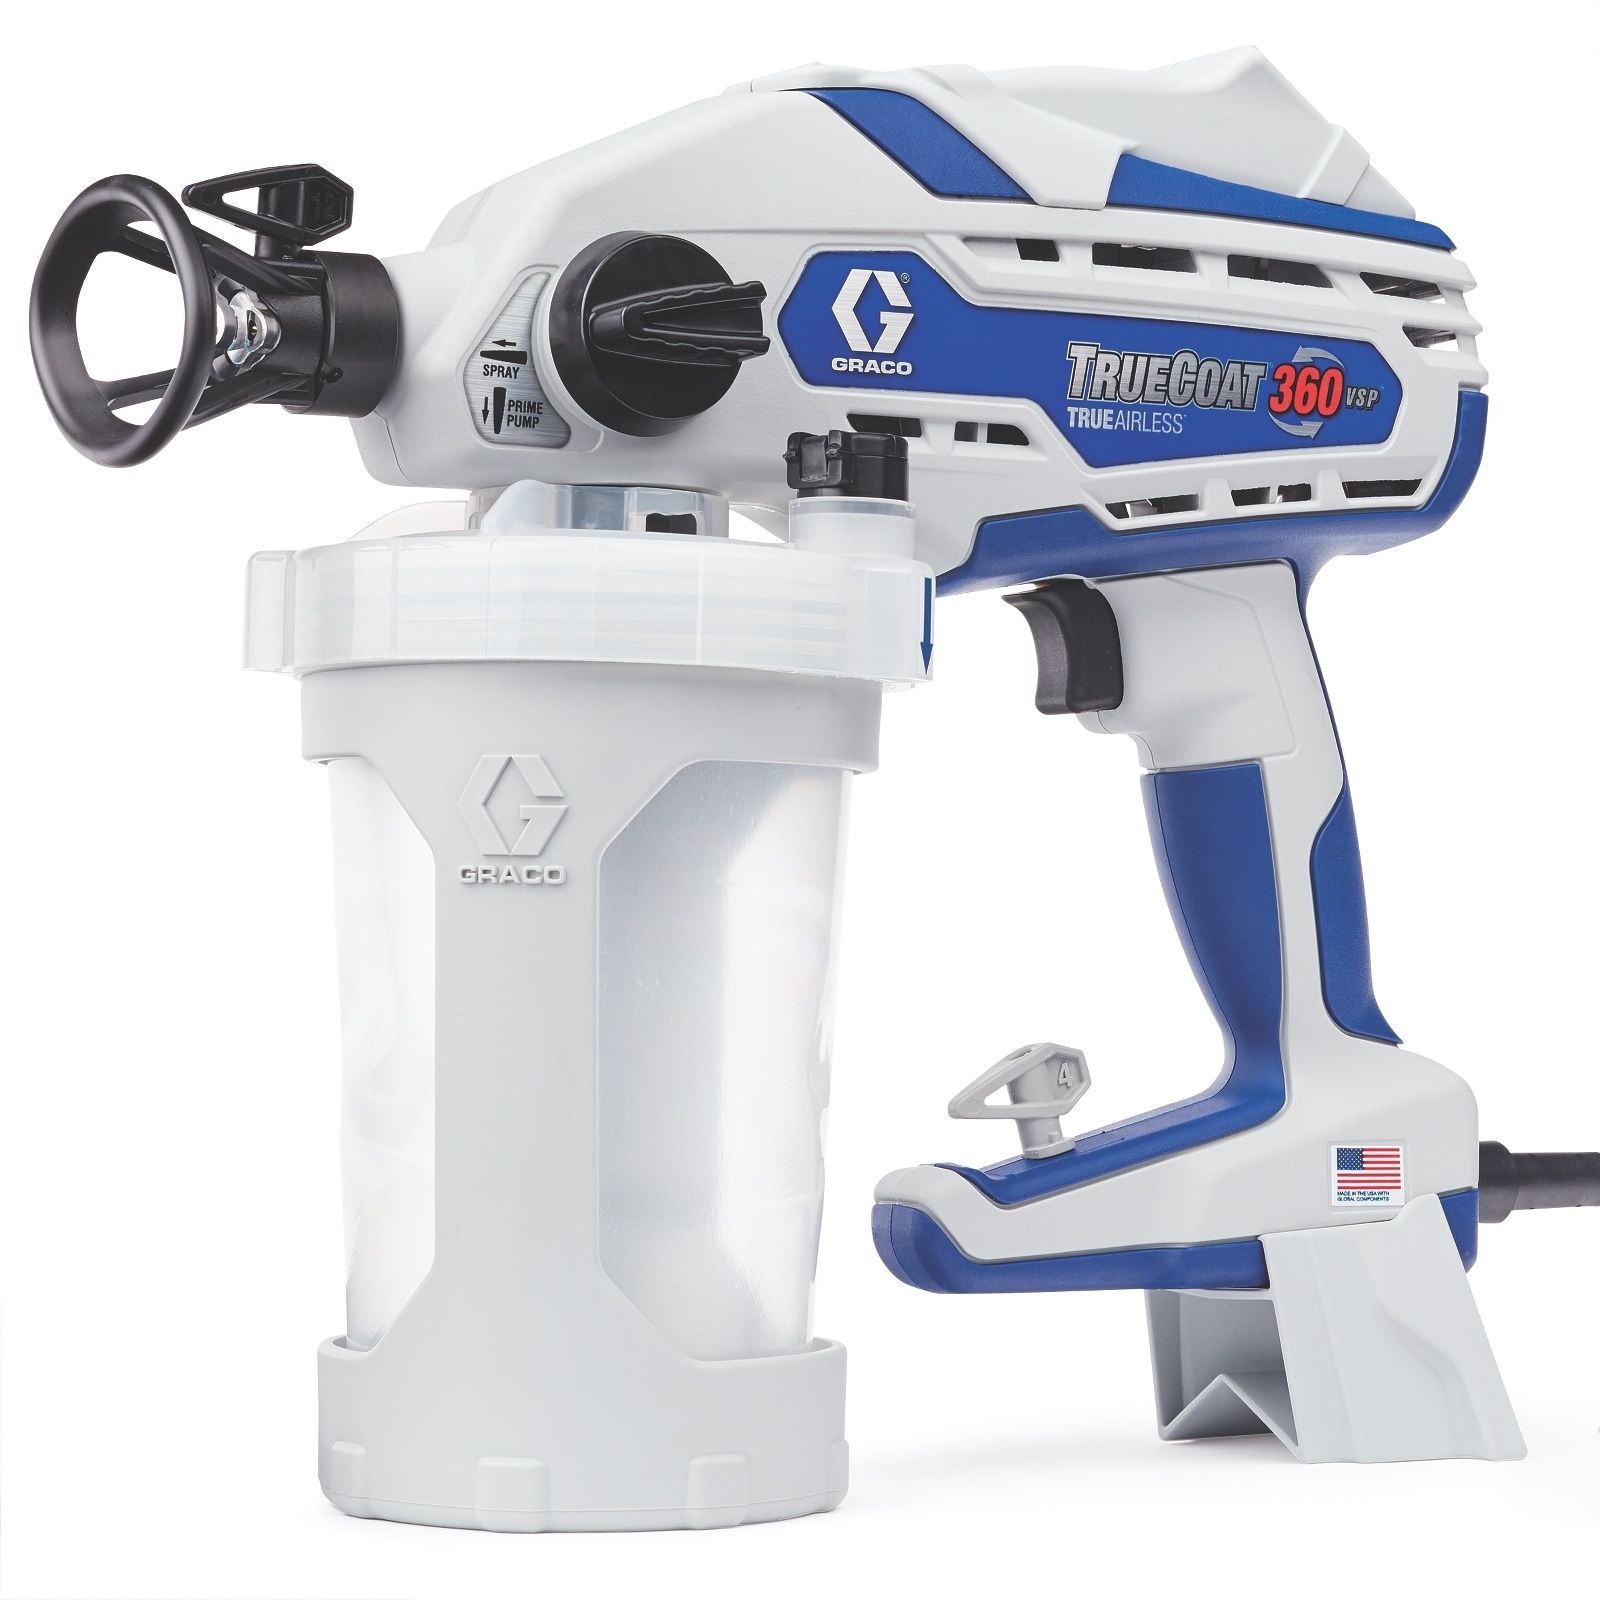 Comparing the Wagner Flexio 3500 to the Graco Airless Handheld